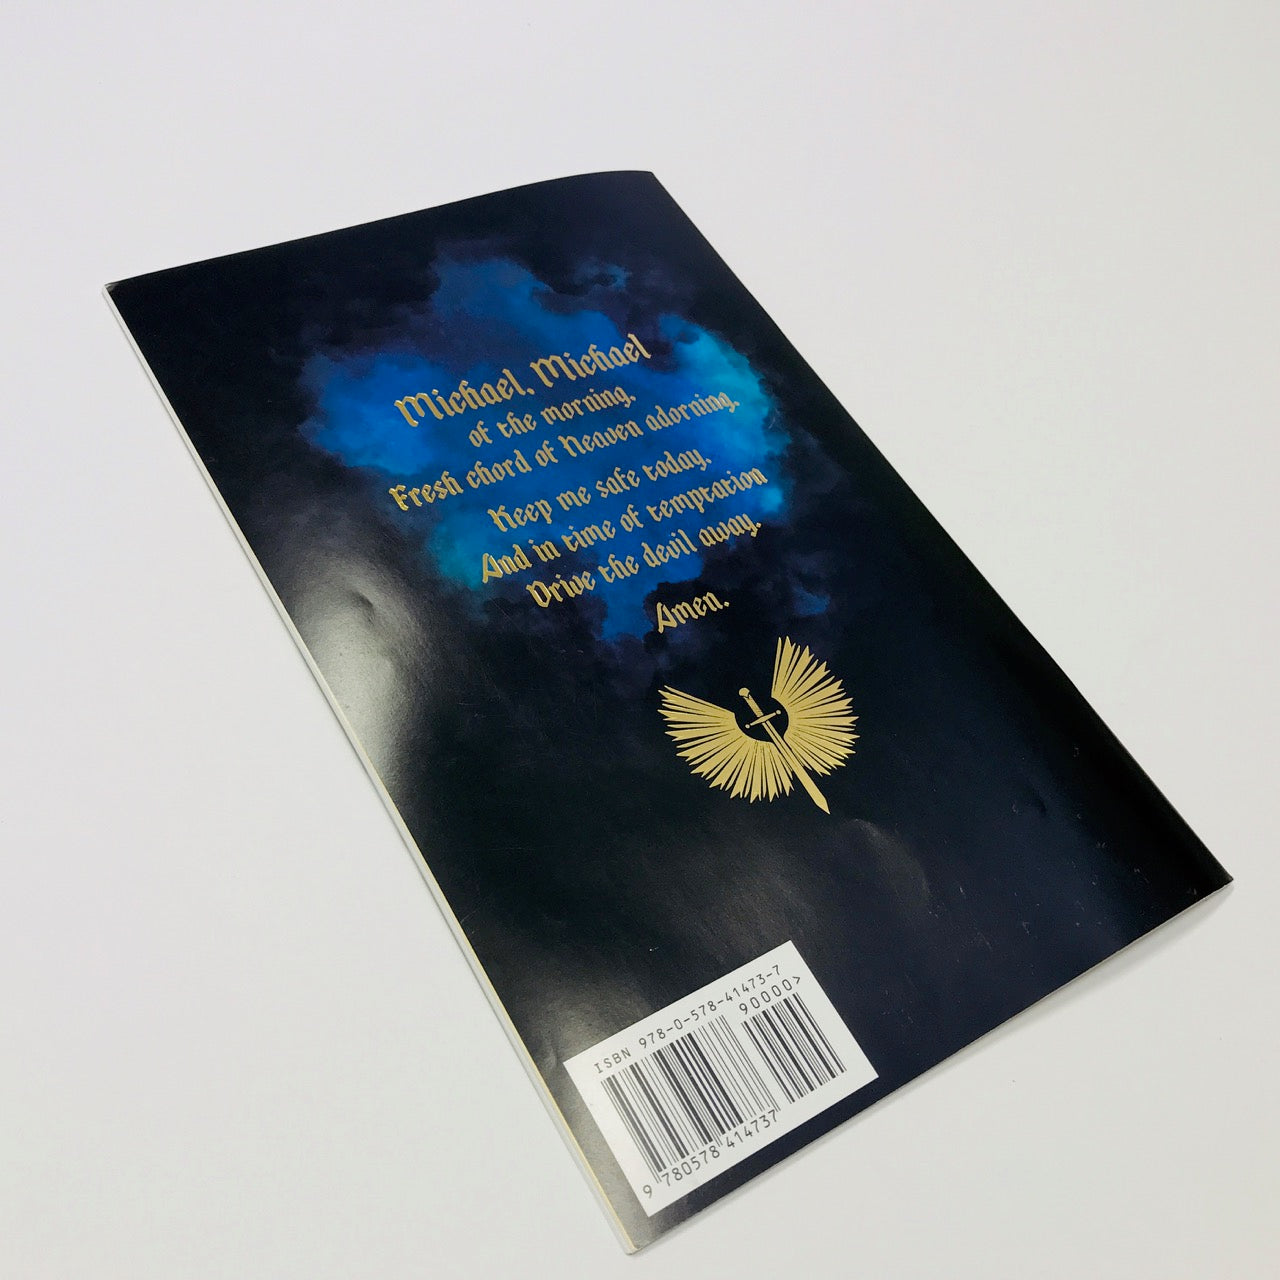 Saint Michael Above the 38th Parallel Gold Edition Comic Book